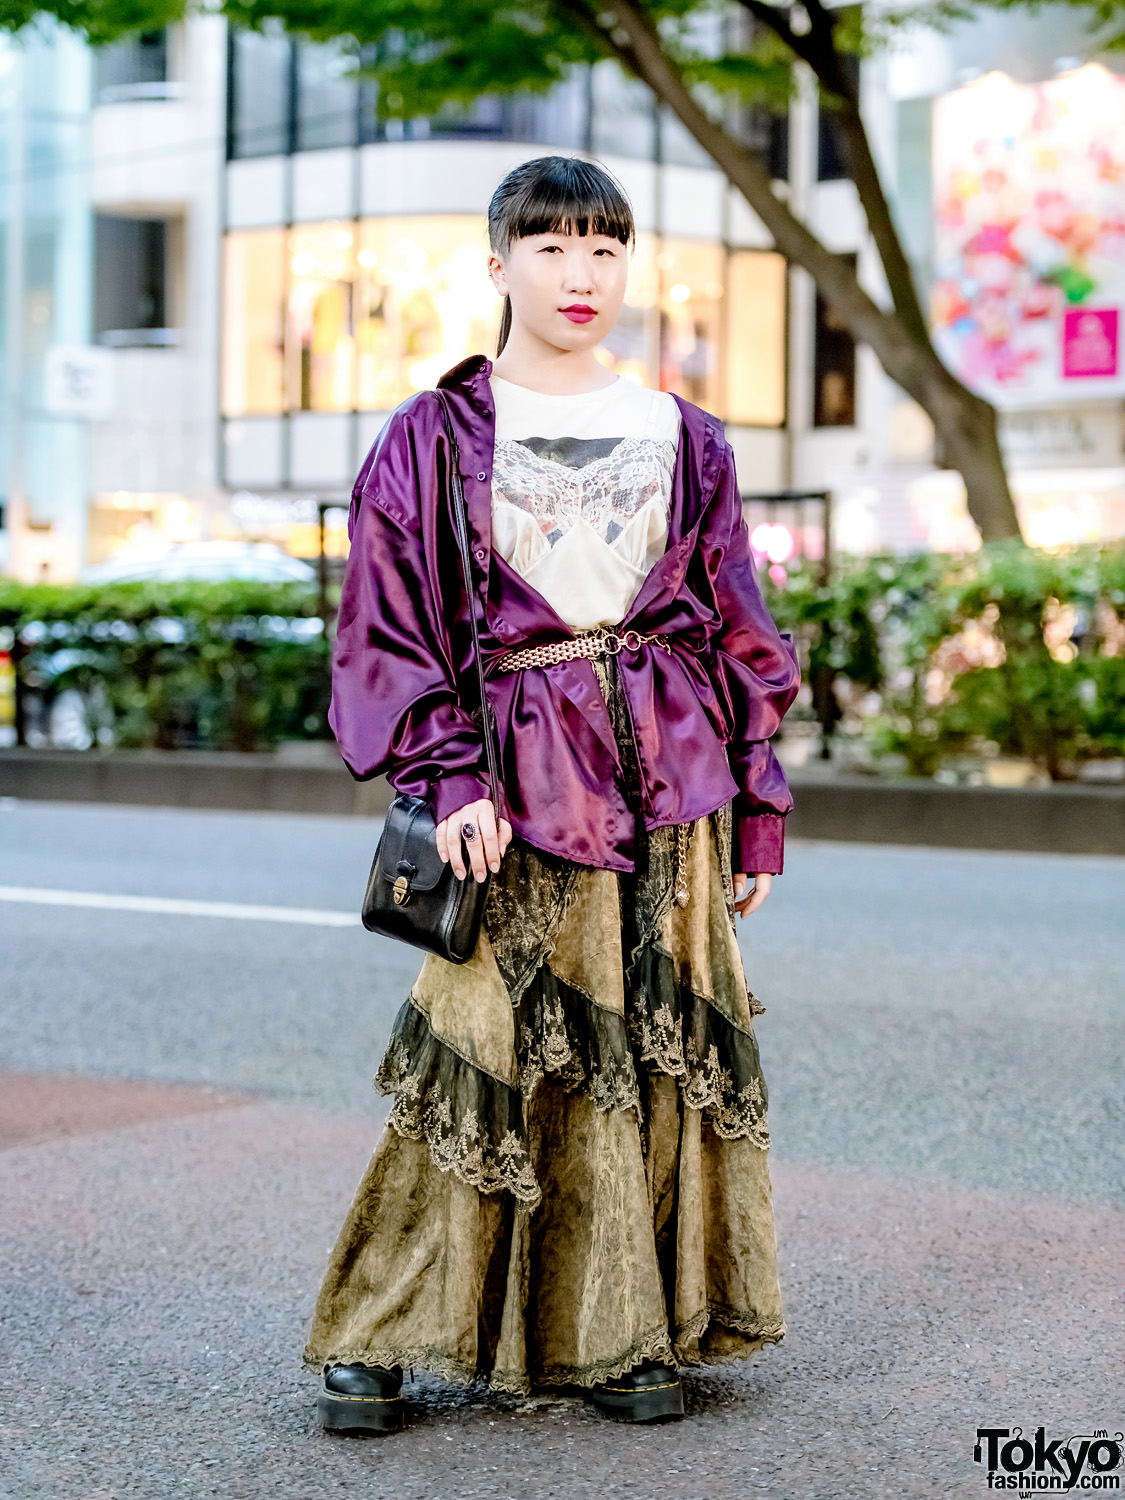 Layered Vintage Street Style w/ Satin Shirt, Camisole Top, Tiered Skirt & Dr. Martens in Harajuku